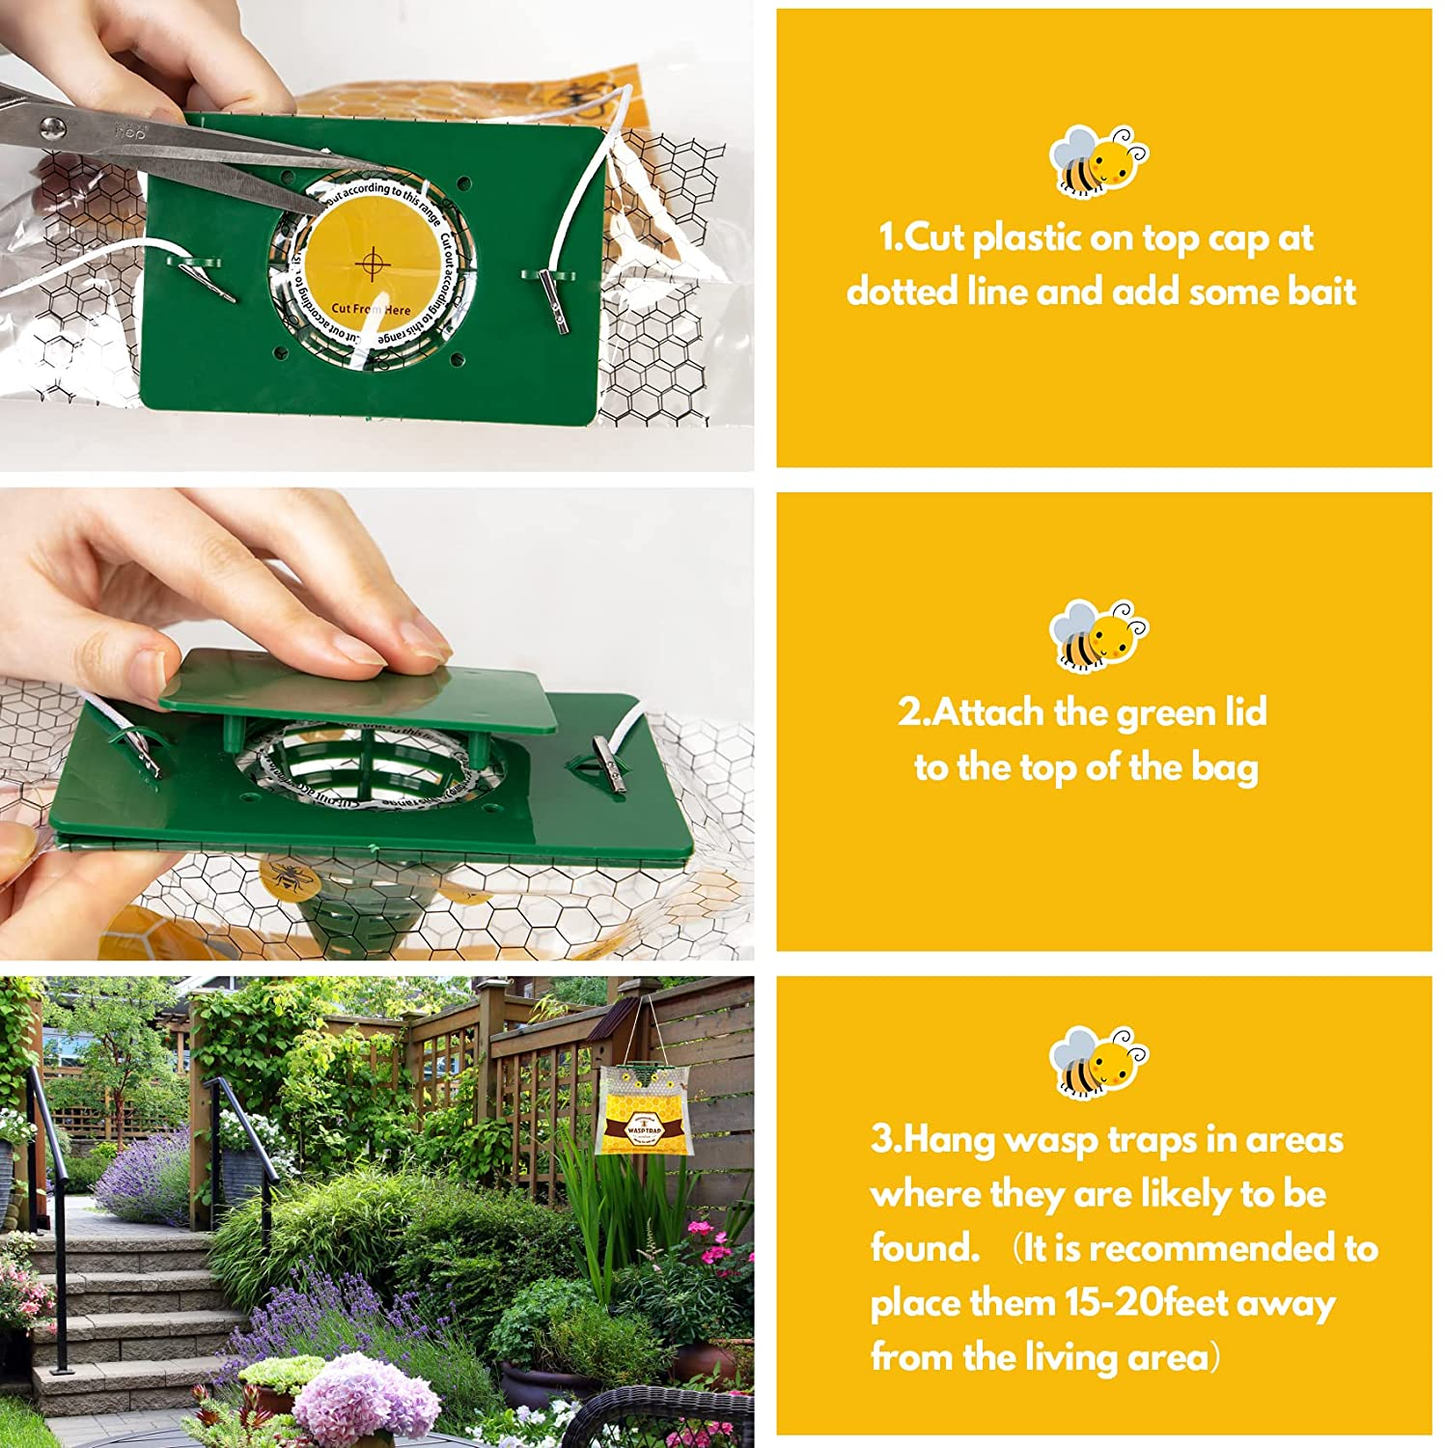 4 Pack Disposable Wasp Trap for Outside, Fly Insects Traps Bag Hanging, Hornets Trap Killer, Bee Catcher Outdoor for Yellow Jackets, Carpenter Bee, Insects and Bug